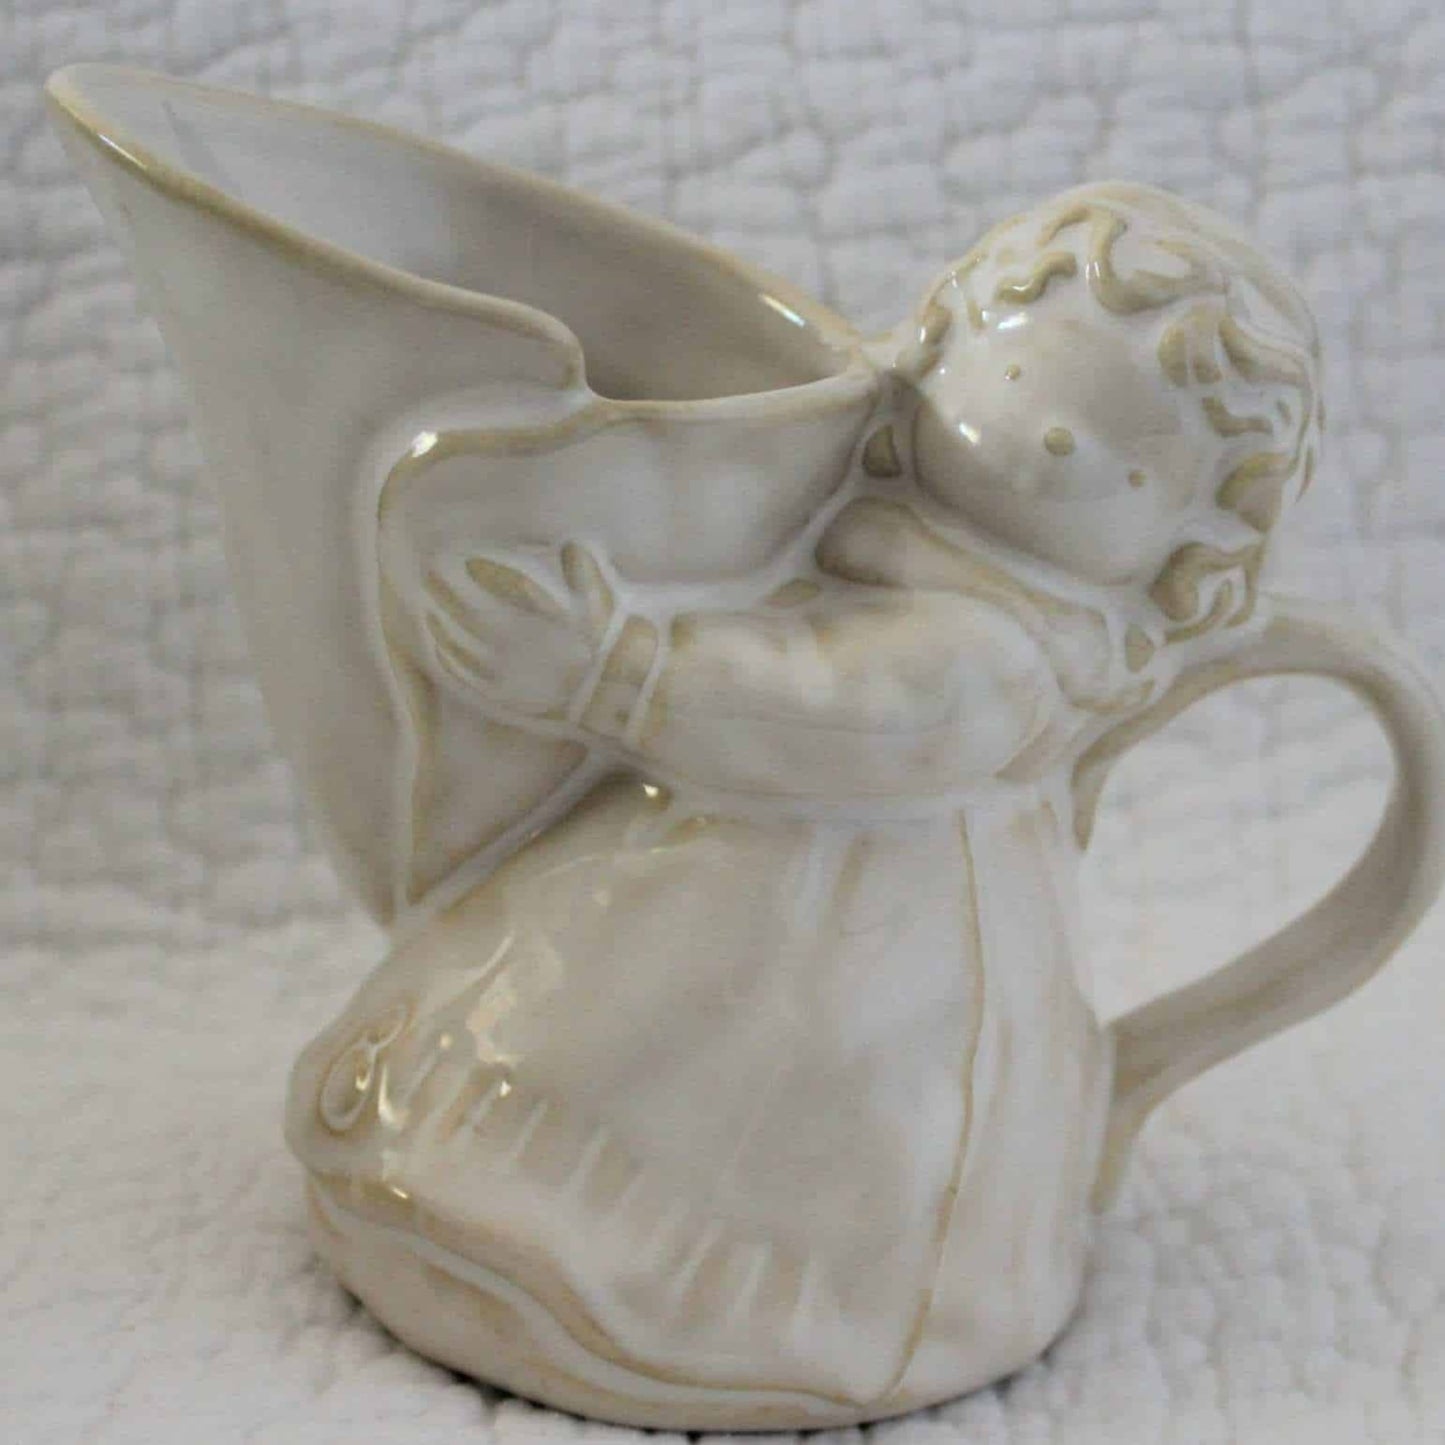 Creamer and Sugar Bowl with Lid, Twelve Days of Christmas, Pottery Barn, Ceramic